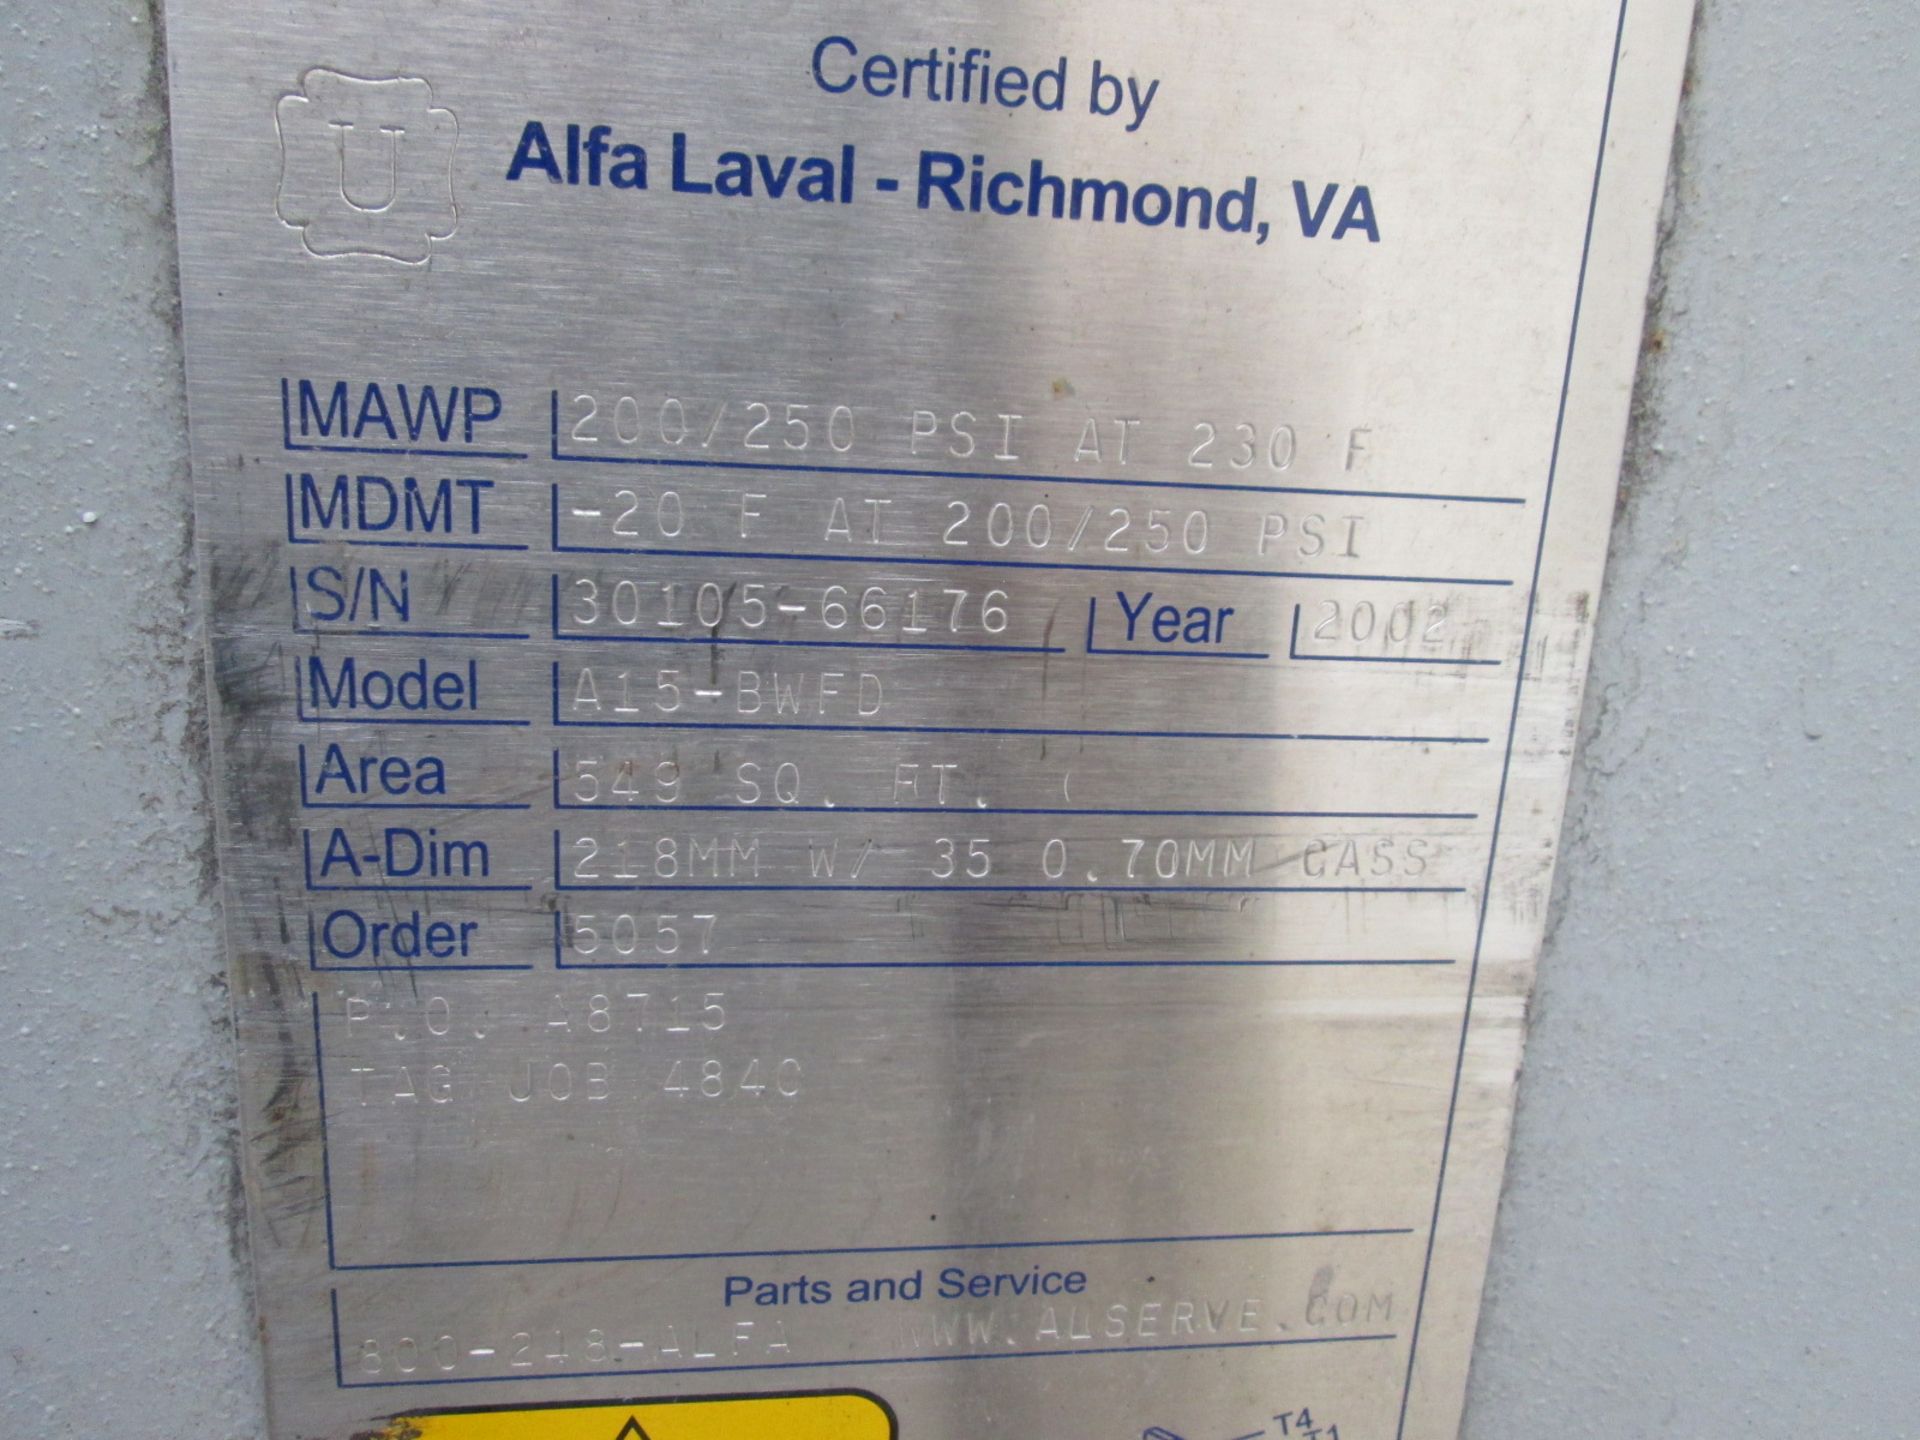 Alfa-Laval Model A15-BWFD Plate and Frame Ammonia Chiller, S/N: 30105-66176 | Load Fee: $50 - Image 3 of 3